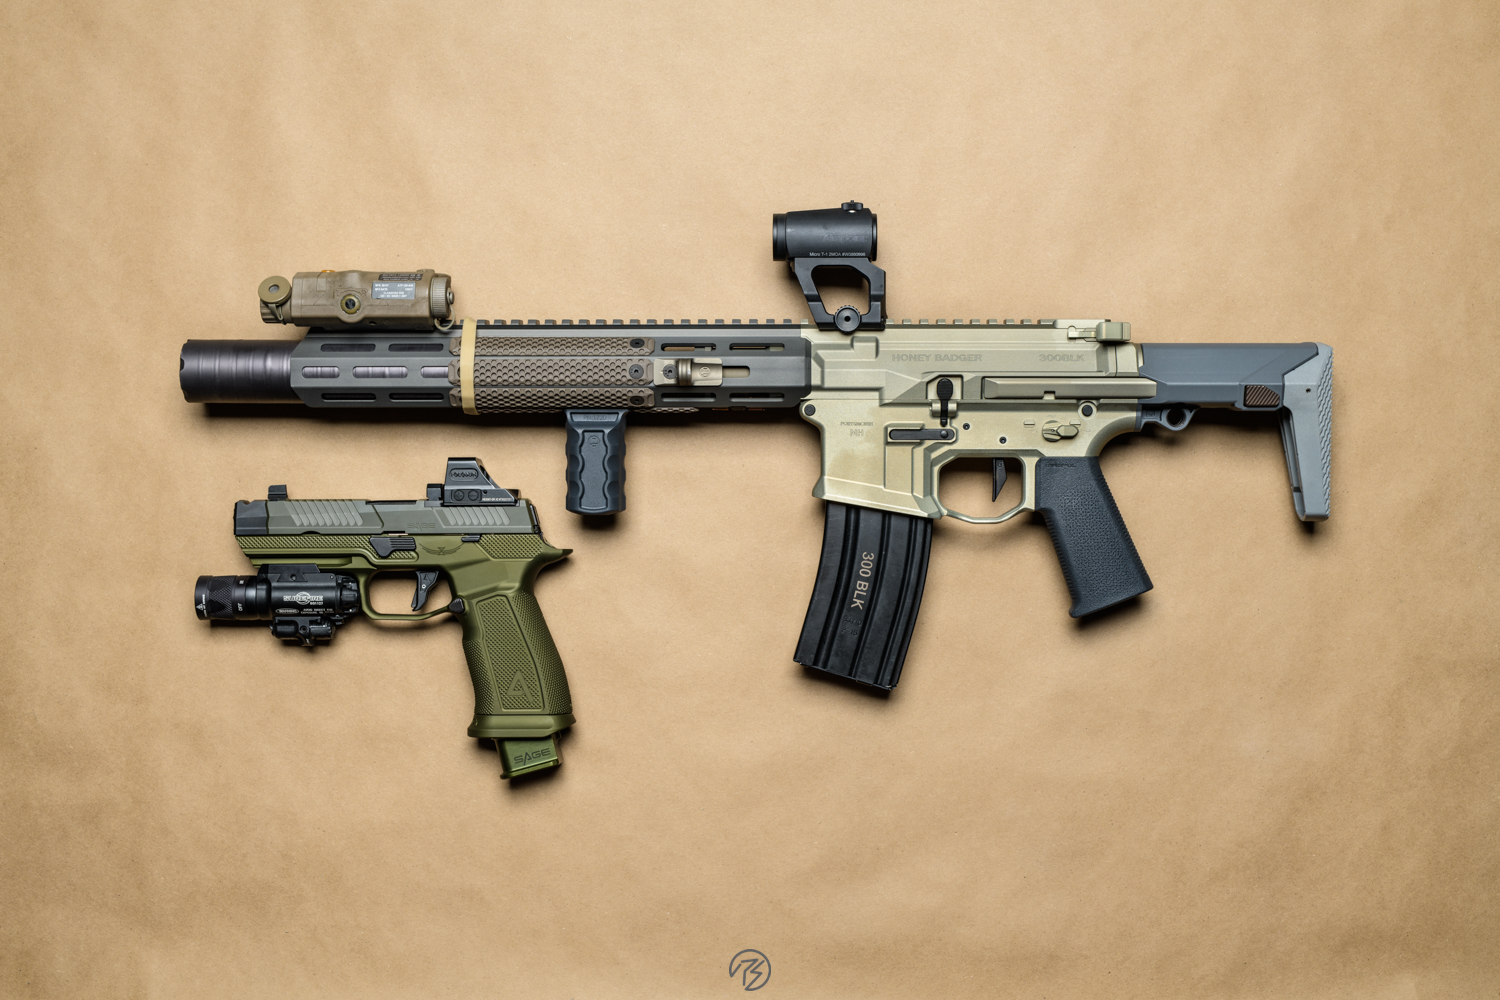 https://railscales.us/blog/questions-to-ask-before-buying-an-ar-15/